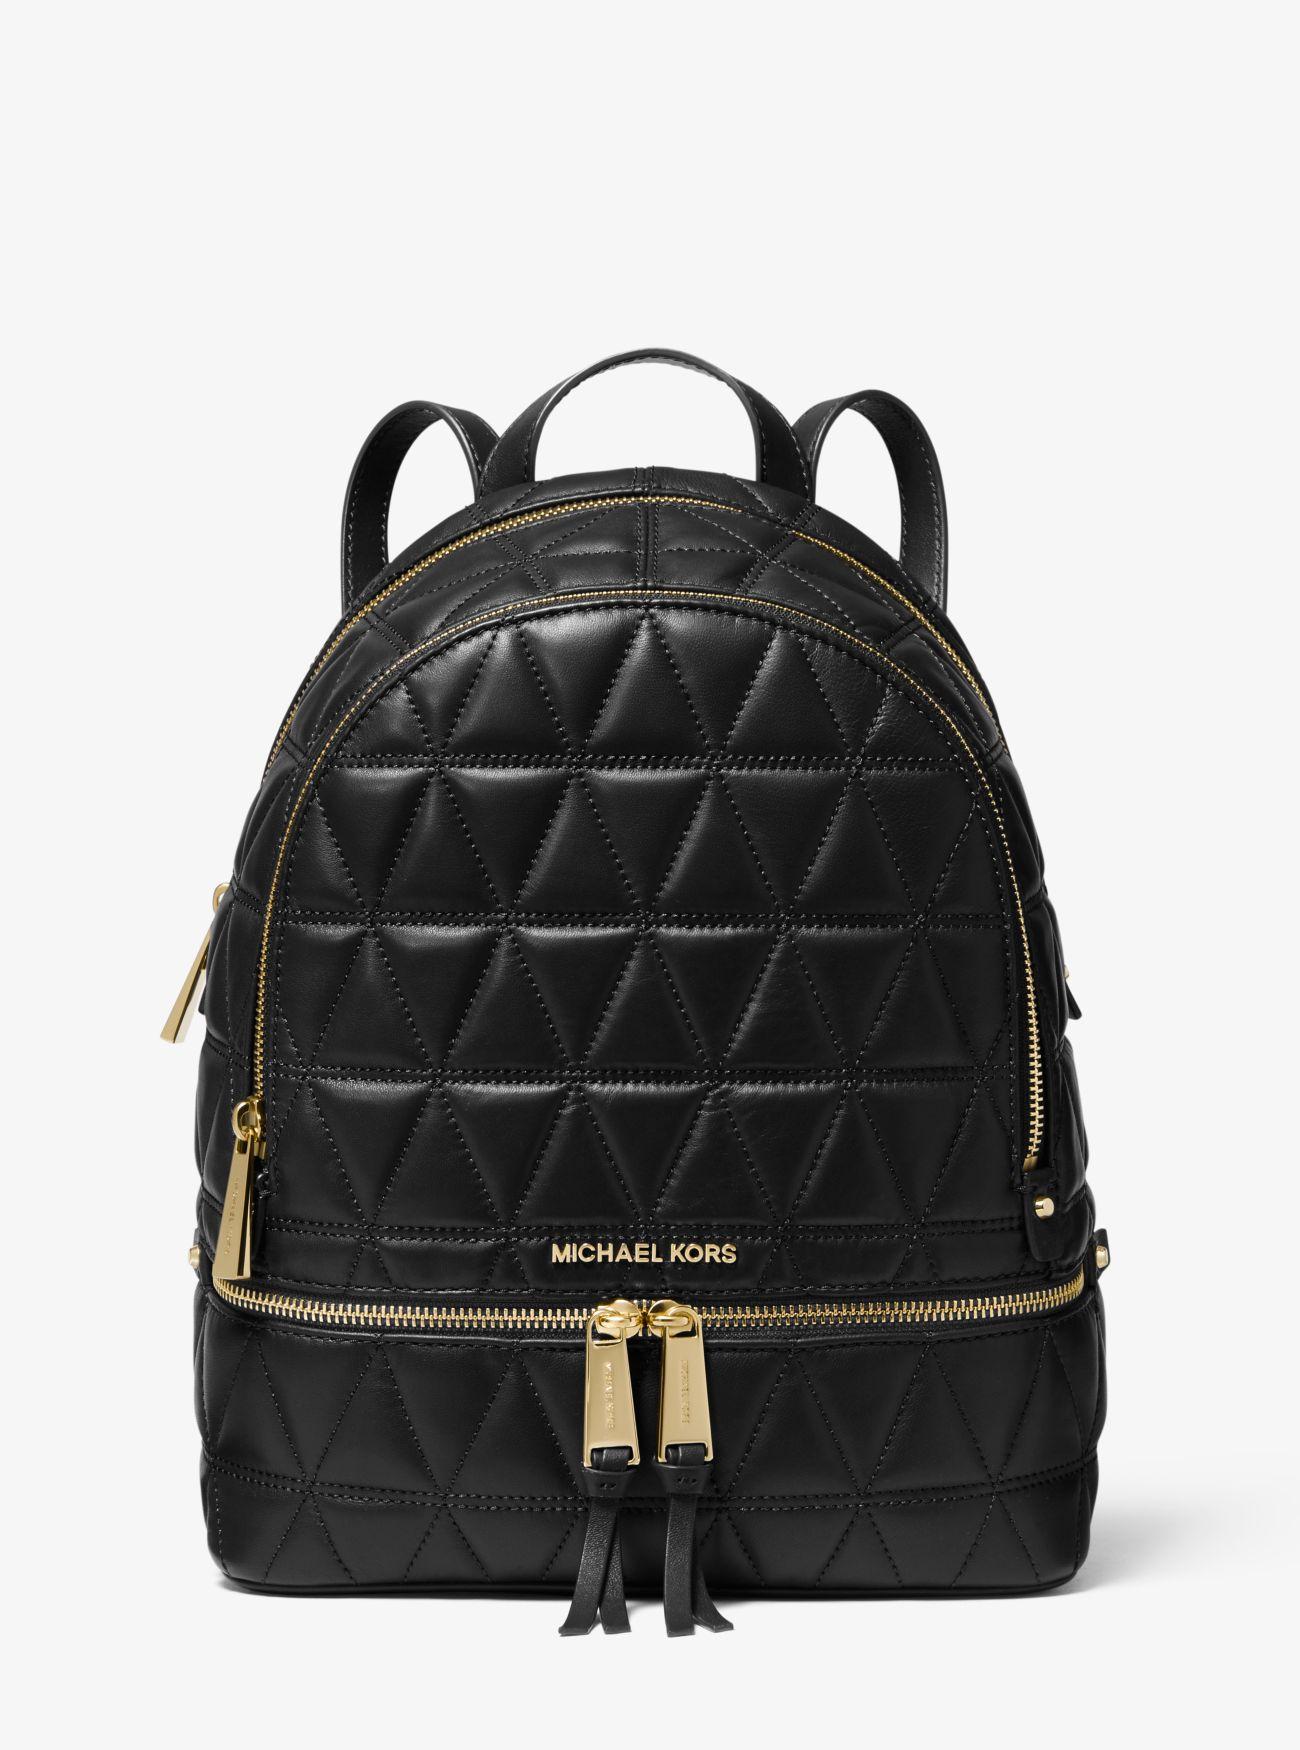 Michael Kors Rhea Medium Quilted Leather Backpack in Black - Lyst